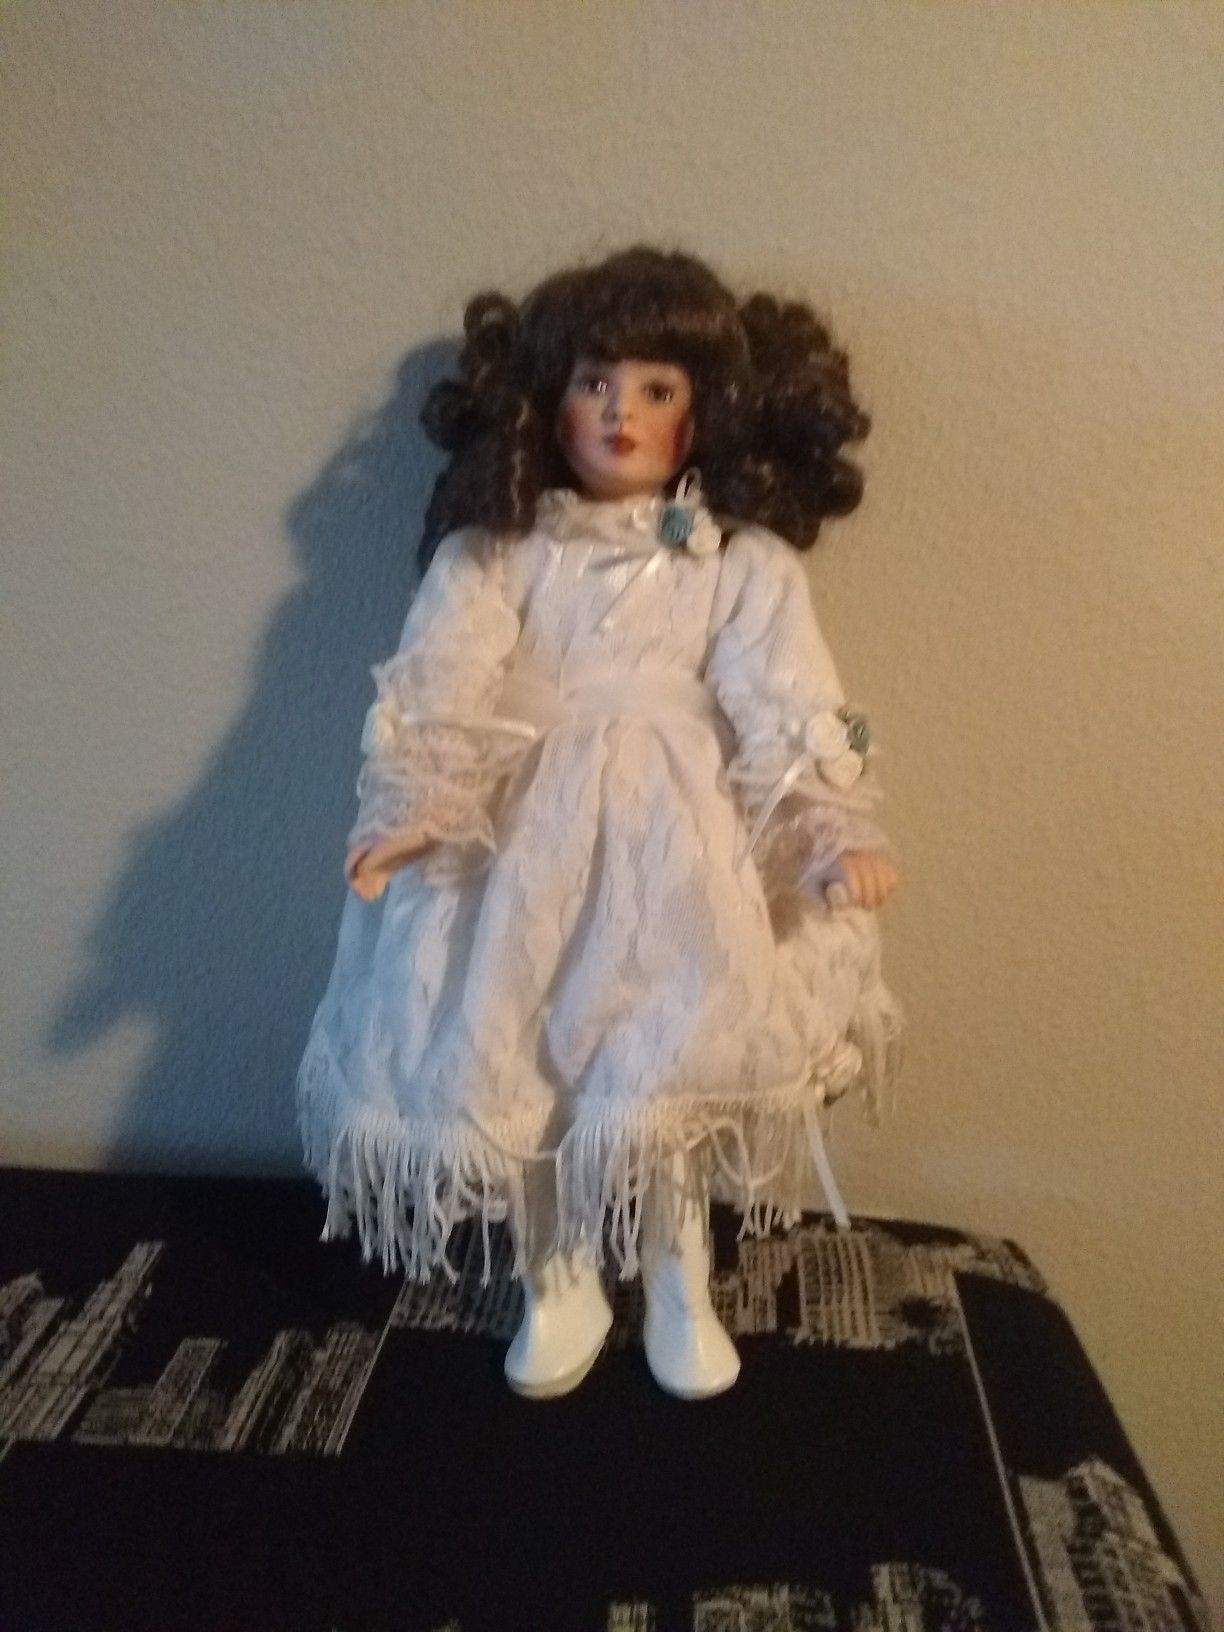 Musical Antique Porcelain Doll.....Only $35.00!